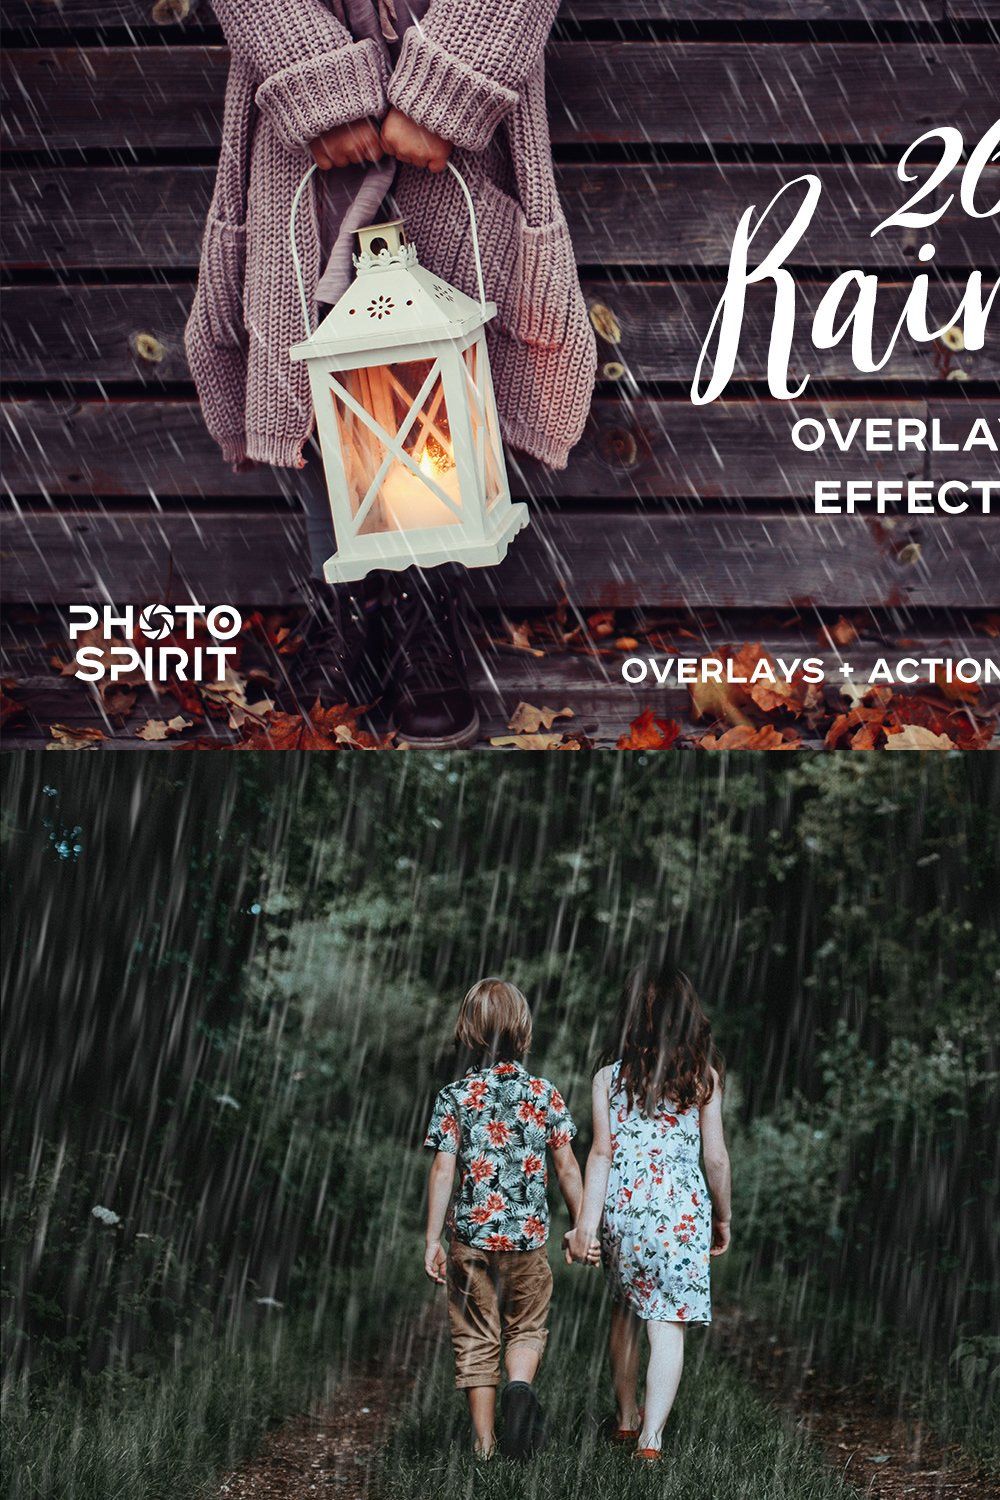 Rain Overlay Effects pinterest preview image.